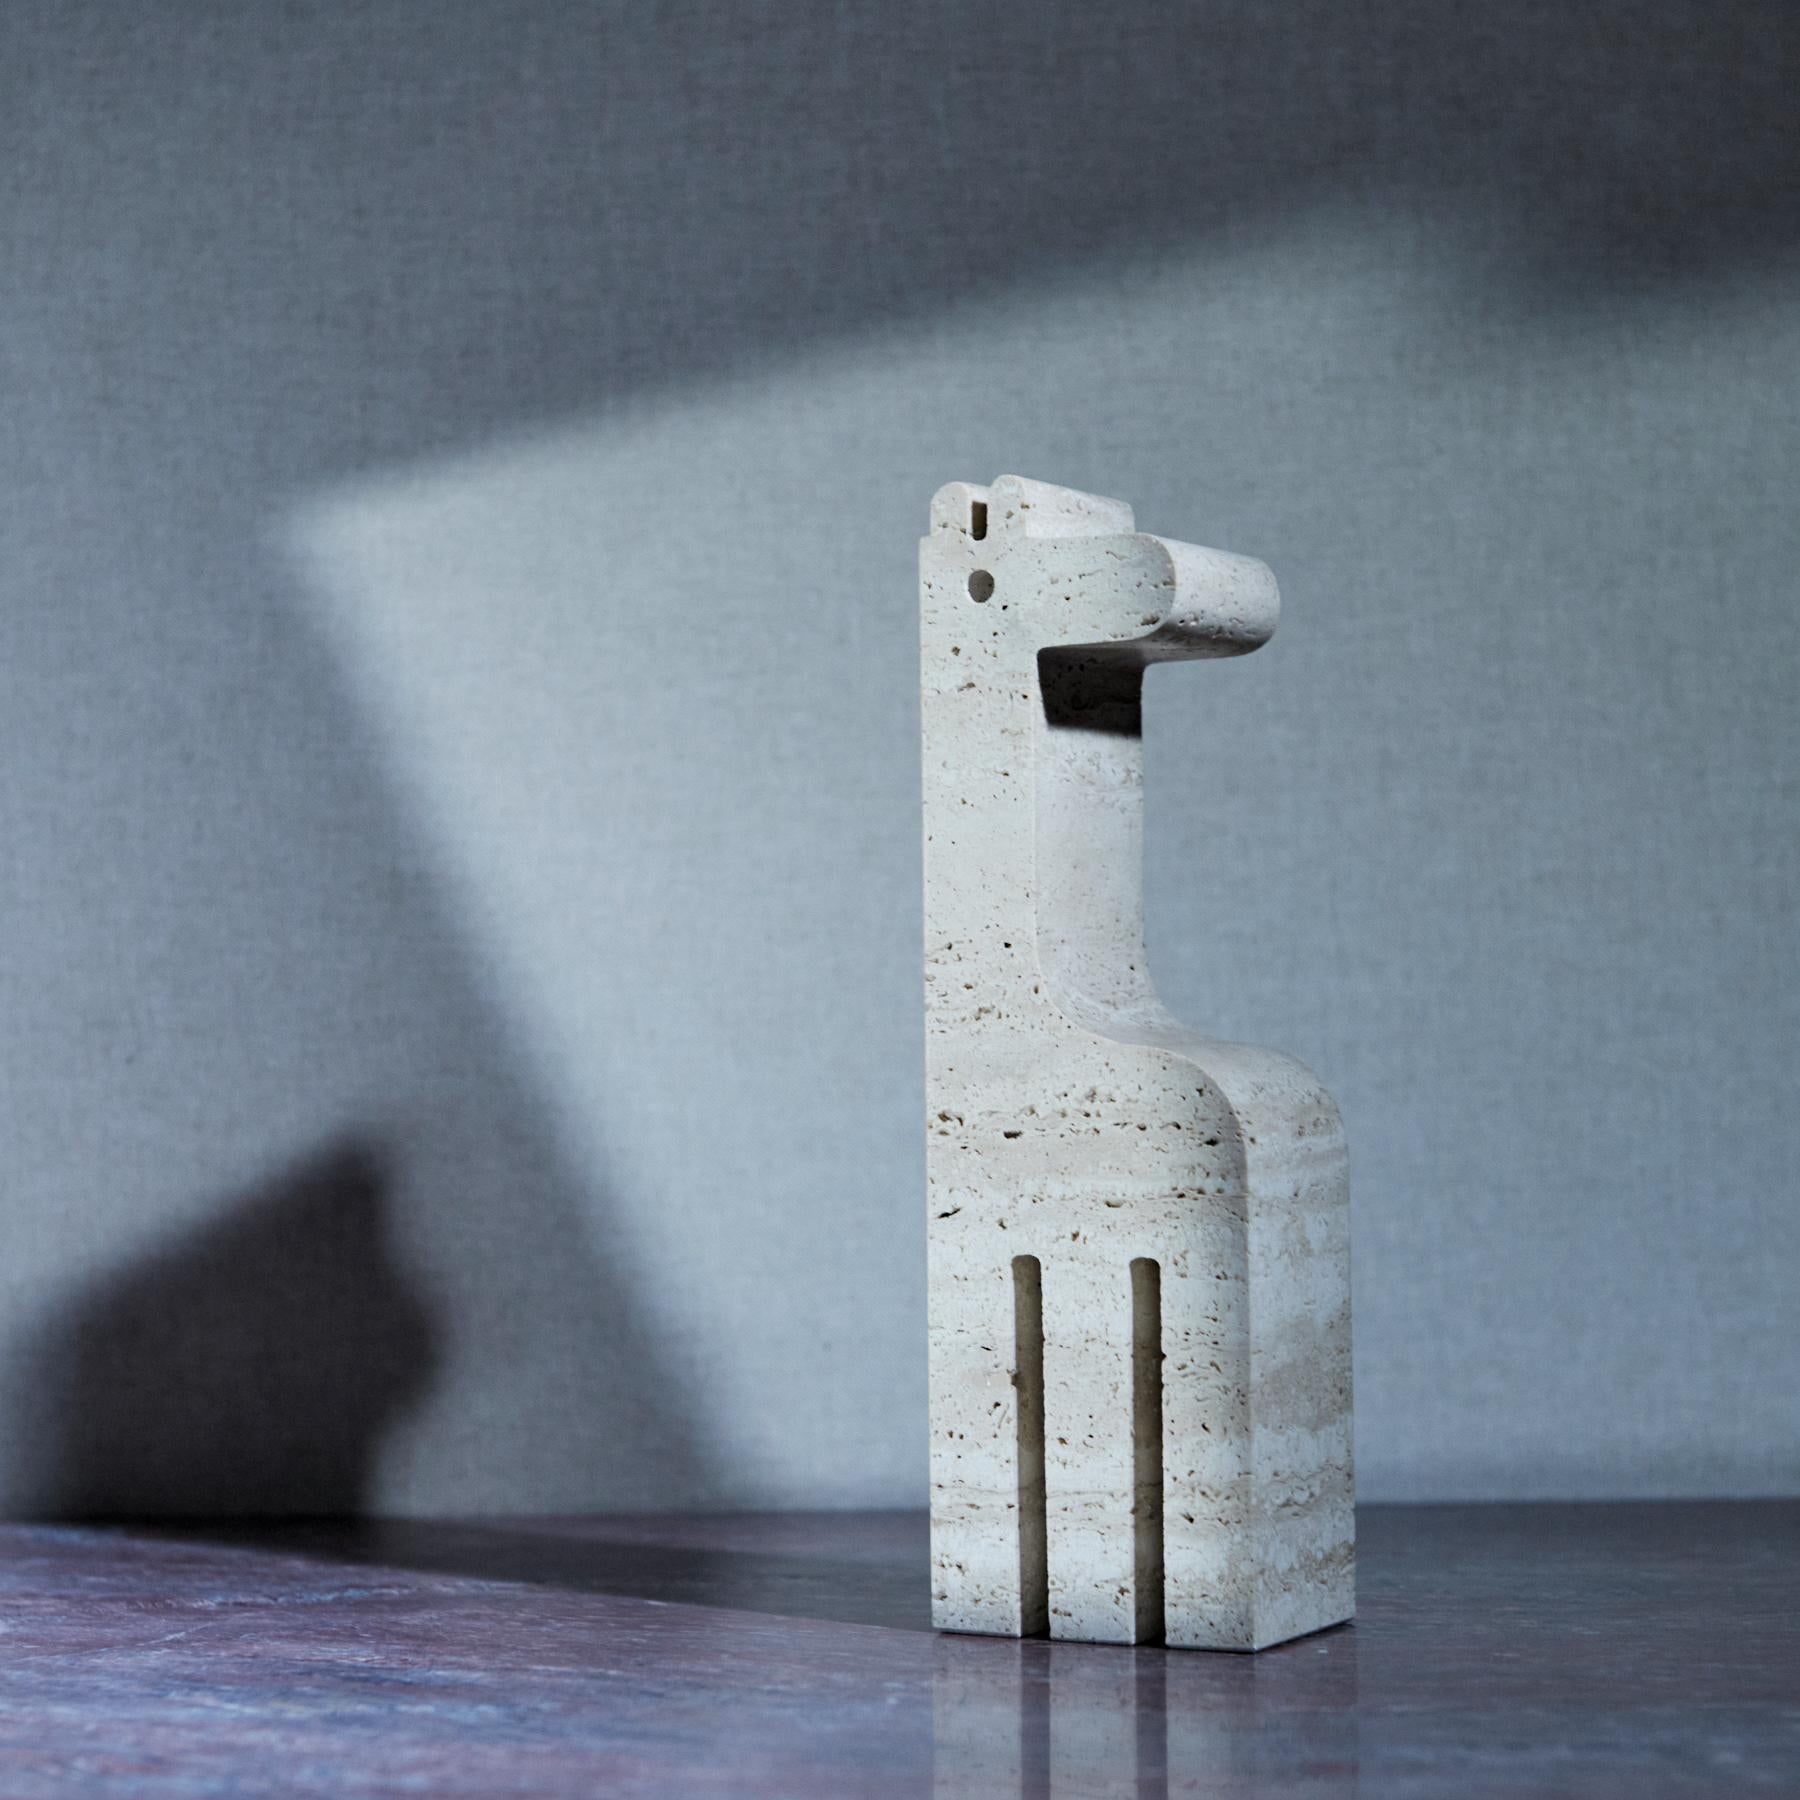 Giraffe sculpture in genuine travertine from Rapolano (Tuscany) made by the renowned Italien designer Fratelli Mannelli in the 1970s.⁠ 

Next to figures by Fratelli Mannelli we offer a curation of carefully selected artefacts from the 20th and 21st